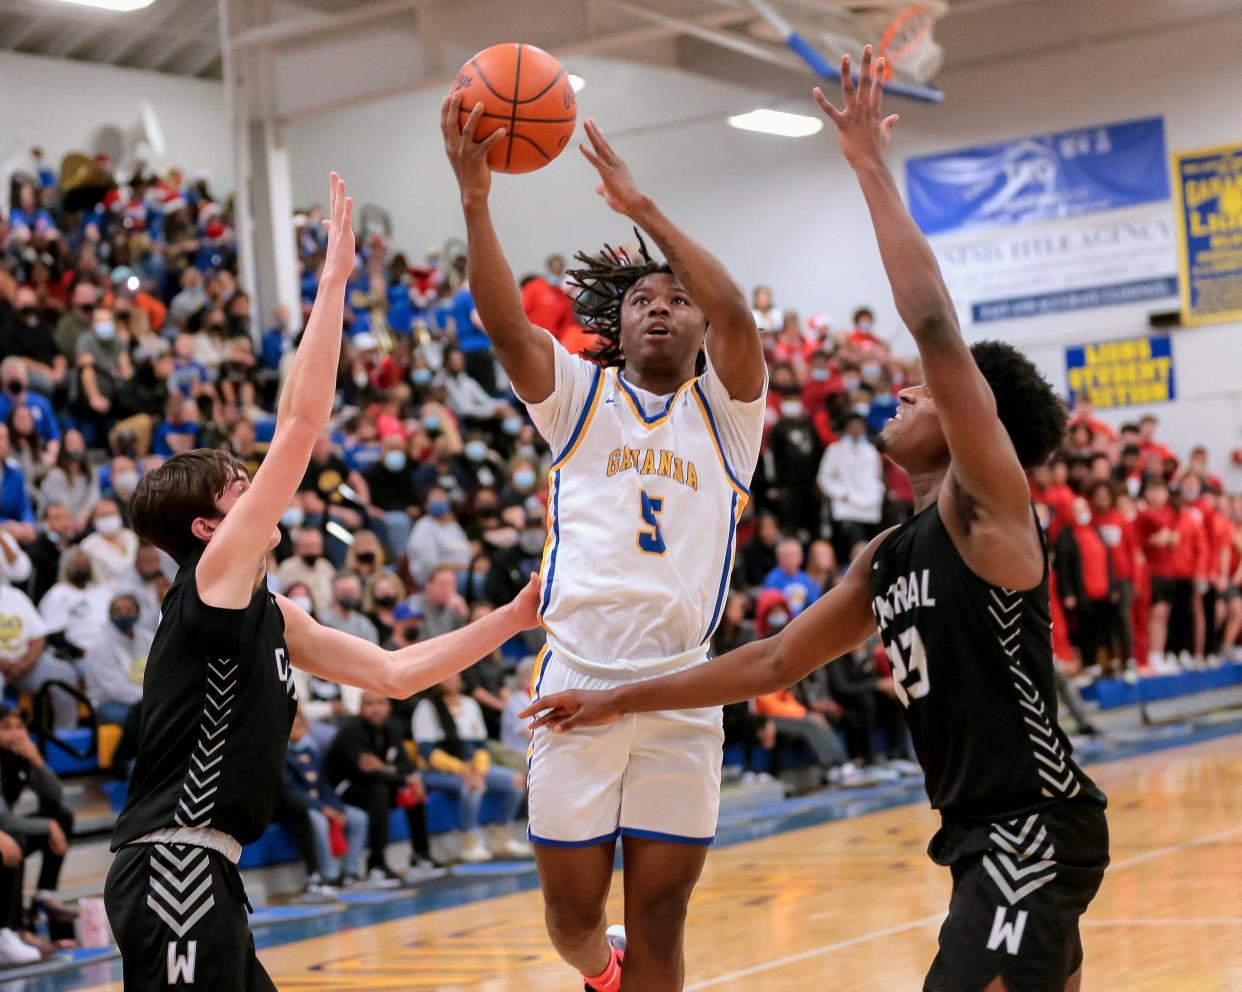 Sean Jones scored 30 points in a 68-49 win over New Albany on Jan. 28 to become Gahanna Lincoln's all-time leading scorer.